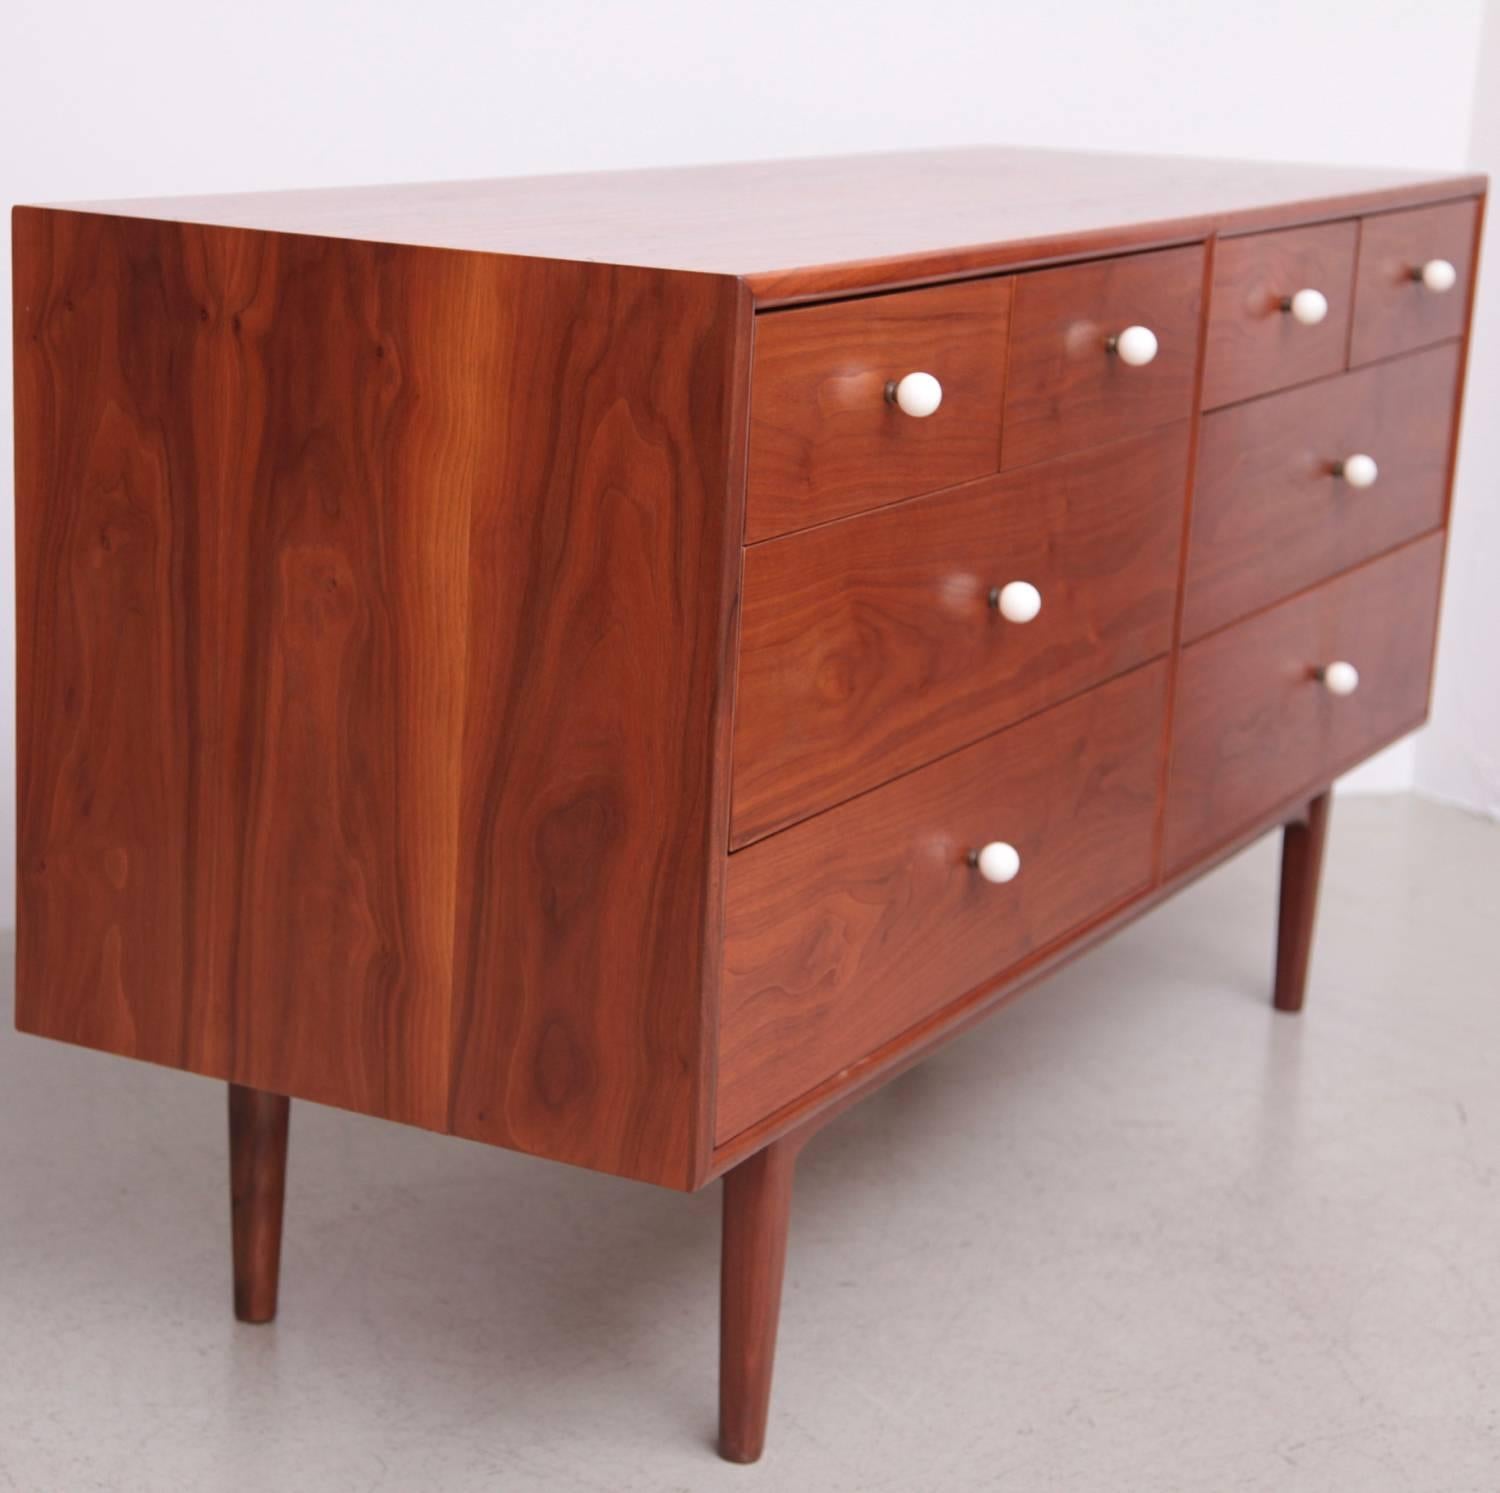 Porcelain Pair of Chest of Drawer Dressers in Walnut by Kipp Stewart for Drexel